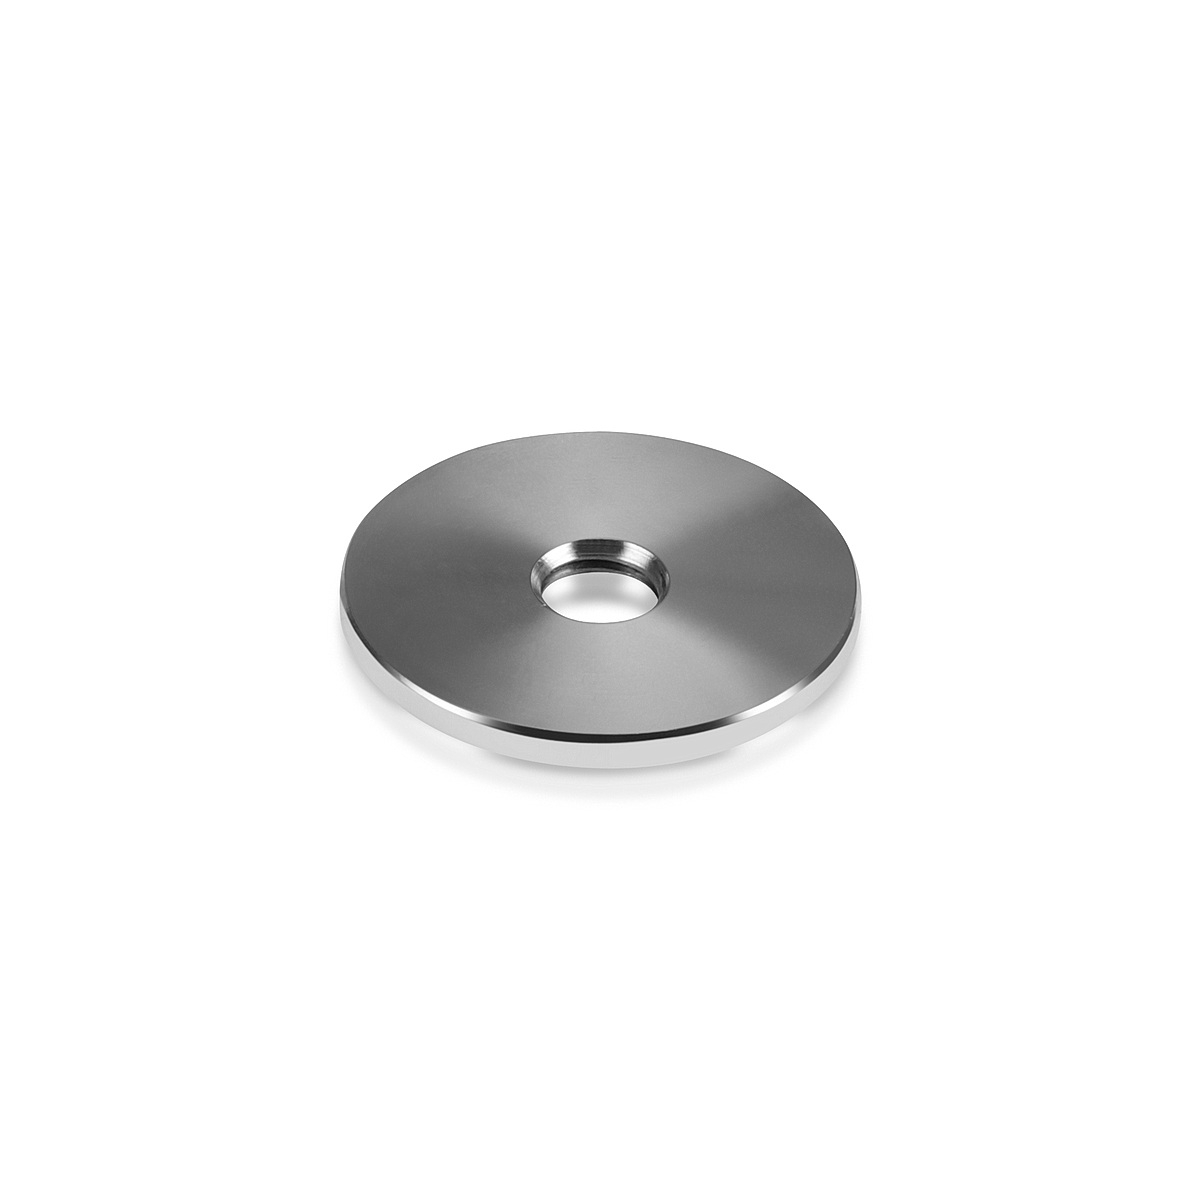 3/8-16 Threaded Barrels Diameter: 1 1/2'', Length: 1/8'',  Stainless Steel 316, Polished [Required Material Hole Size: 3/8'' ]